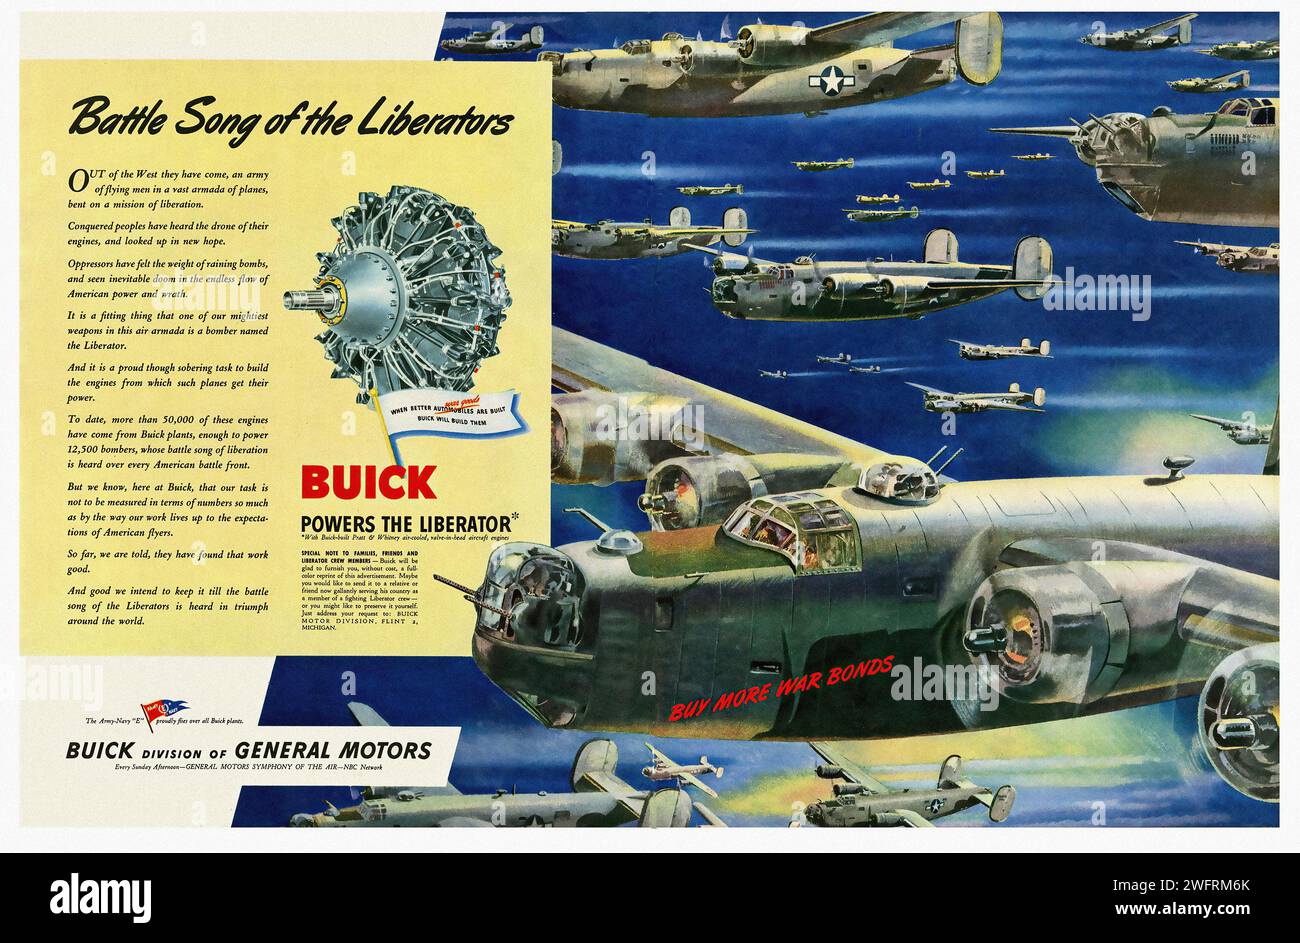 “BATTLE SONG OF THE LIBERATORS”, “BUICK POWERS THE LIBERATOR”, “BUY MORE WAR BONDS”  This is a vintage American advertisement from the World War II era for Buick, a division of General Motors. The advertisement, titled “Battle Song of the Liberators”, features a striking illustration of a fleet of B-24 Liberator bombers flying in formation against a backdrop of a blue sky. Dominating the lower half of the advertisement is a large, detailed illustration of a Buick engine, accompanied by the text “Buick powers the Liberator”. The graphic style of the advertisement is characteristic of mid-centur Stock Photo